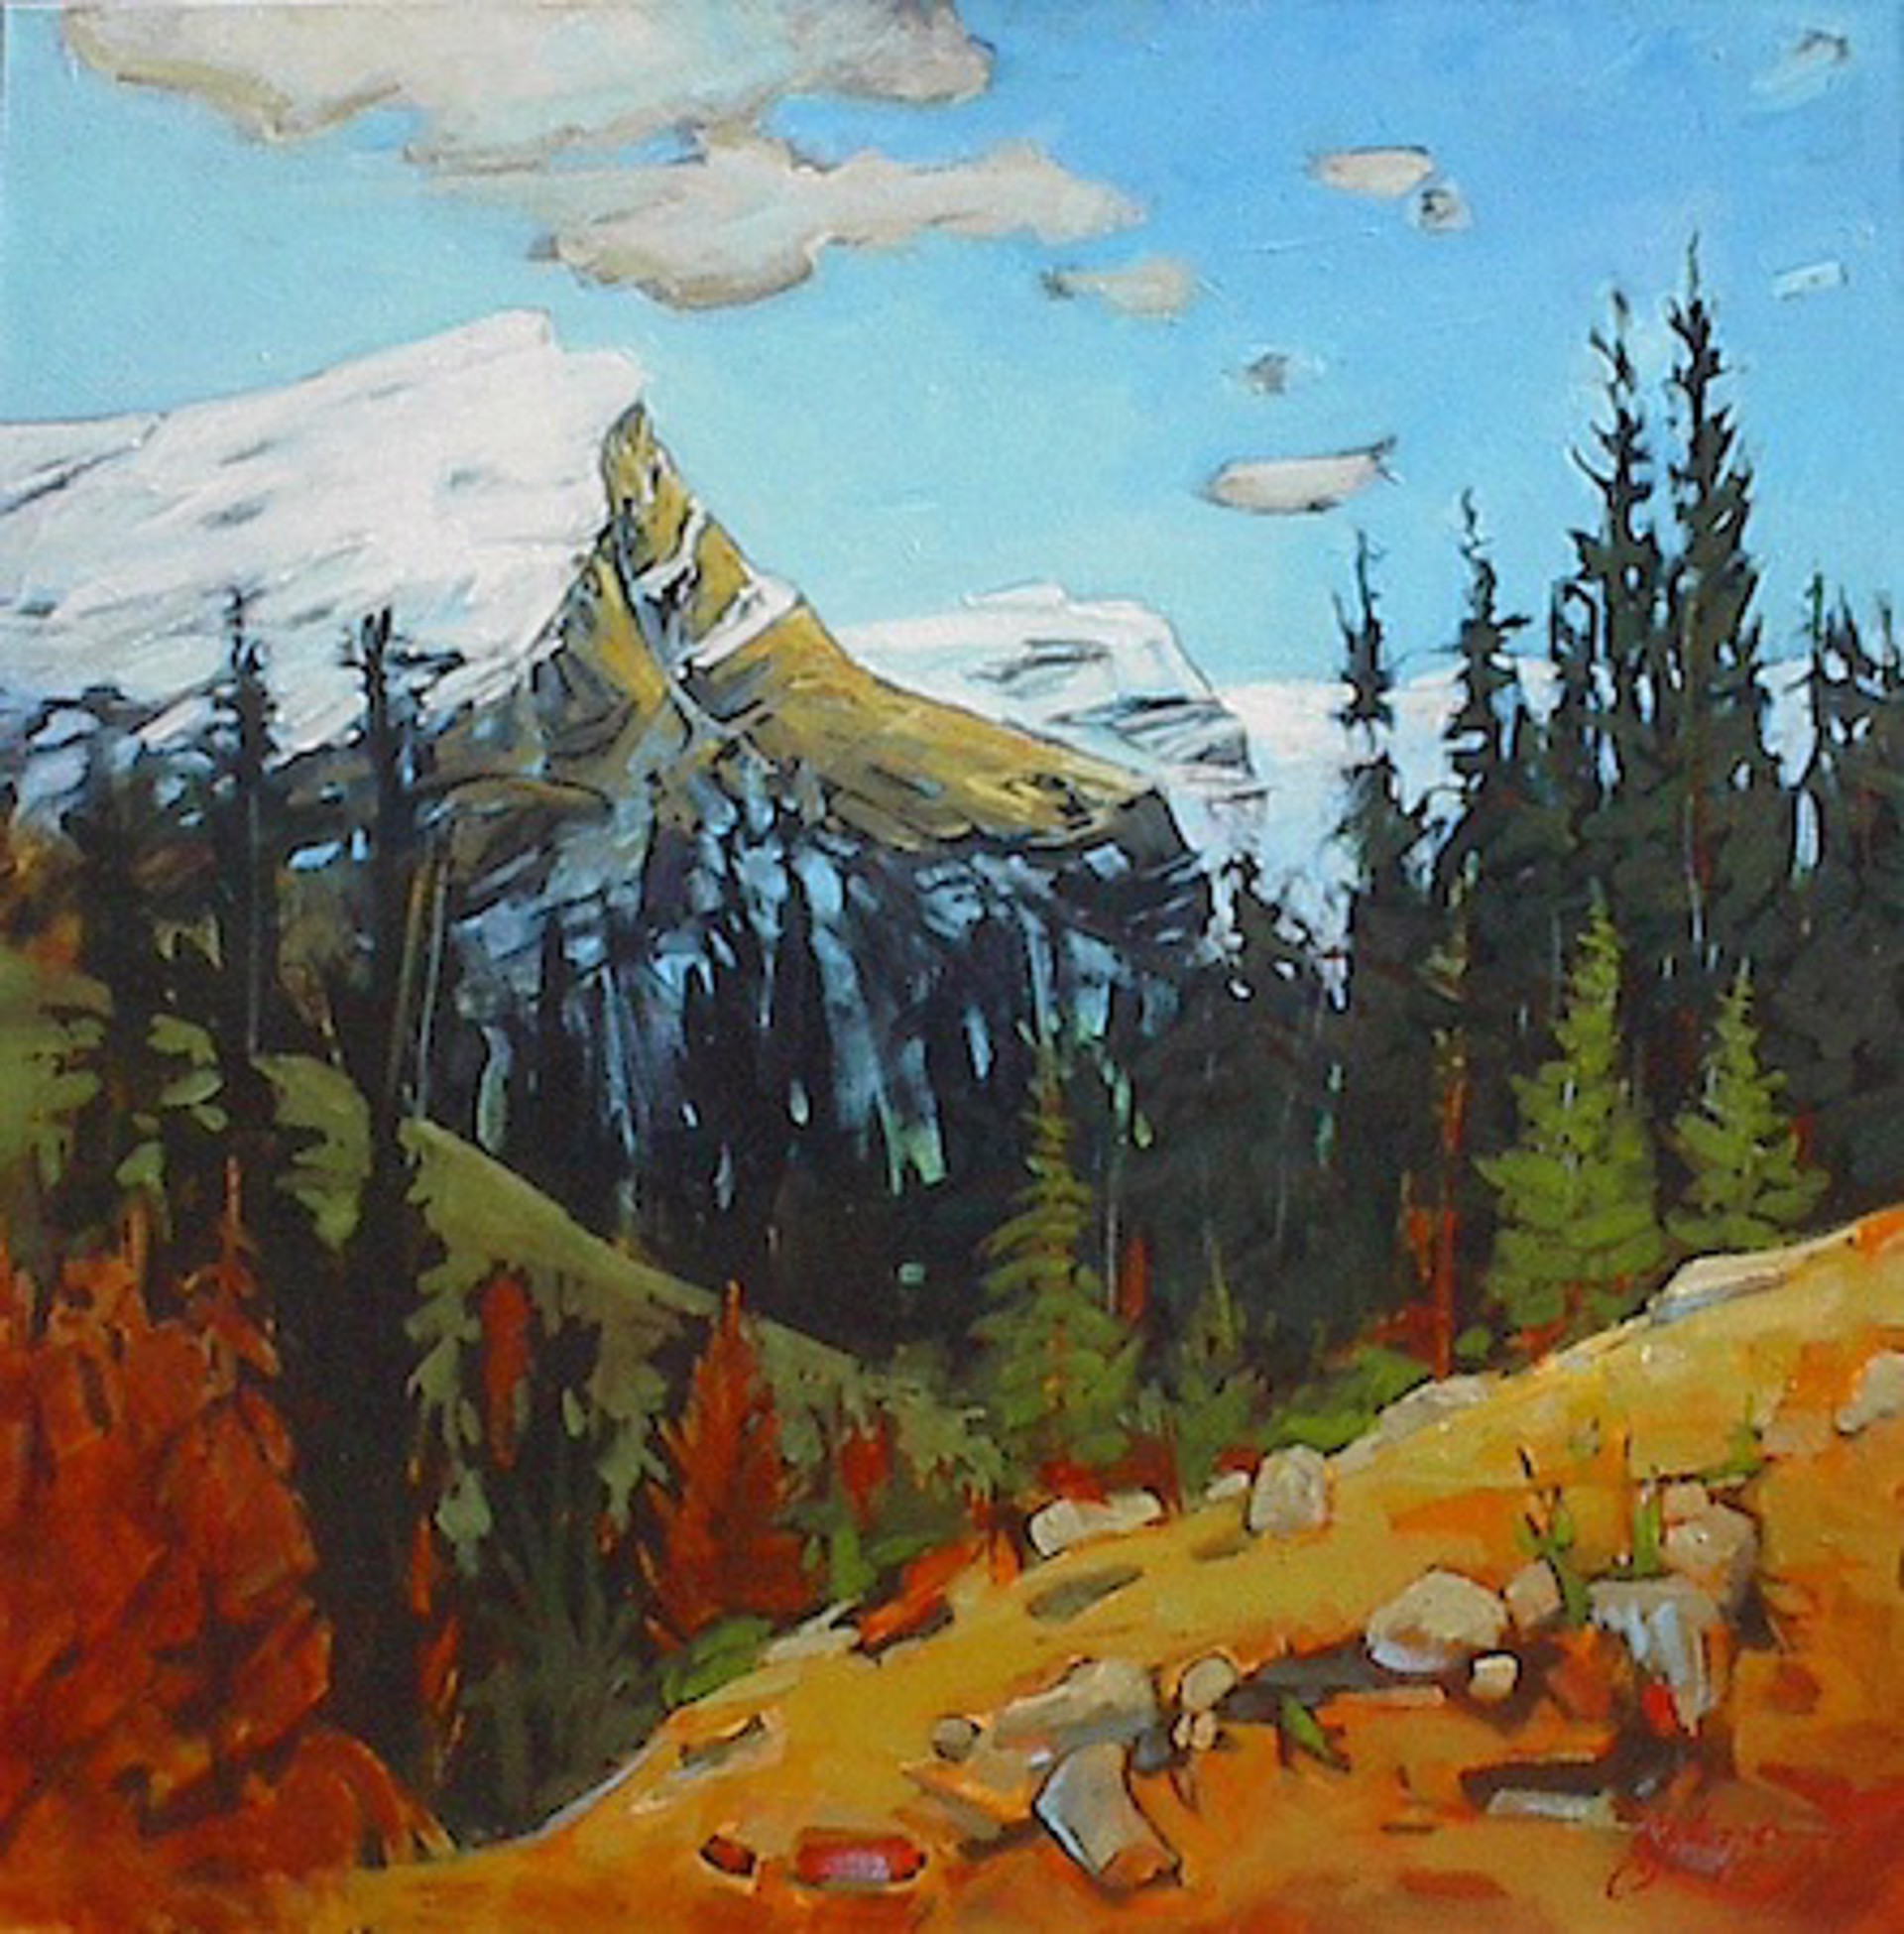 Rundle from the South by Gail Johnson